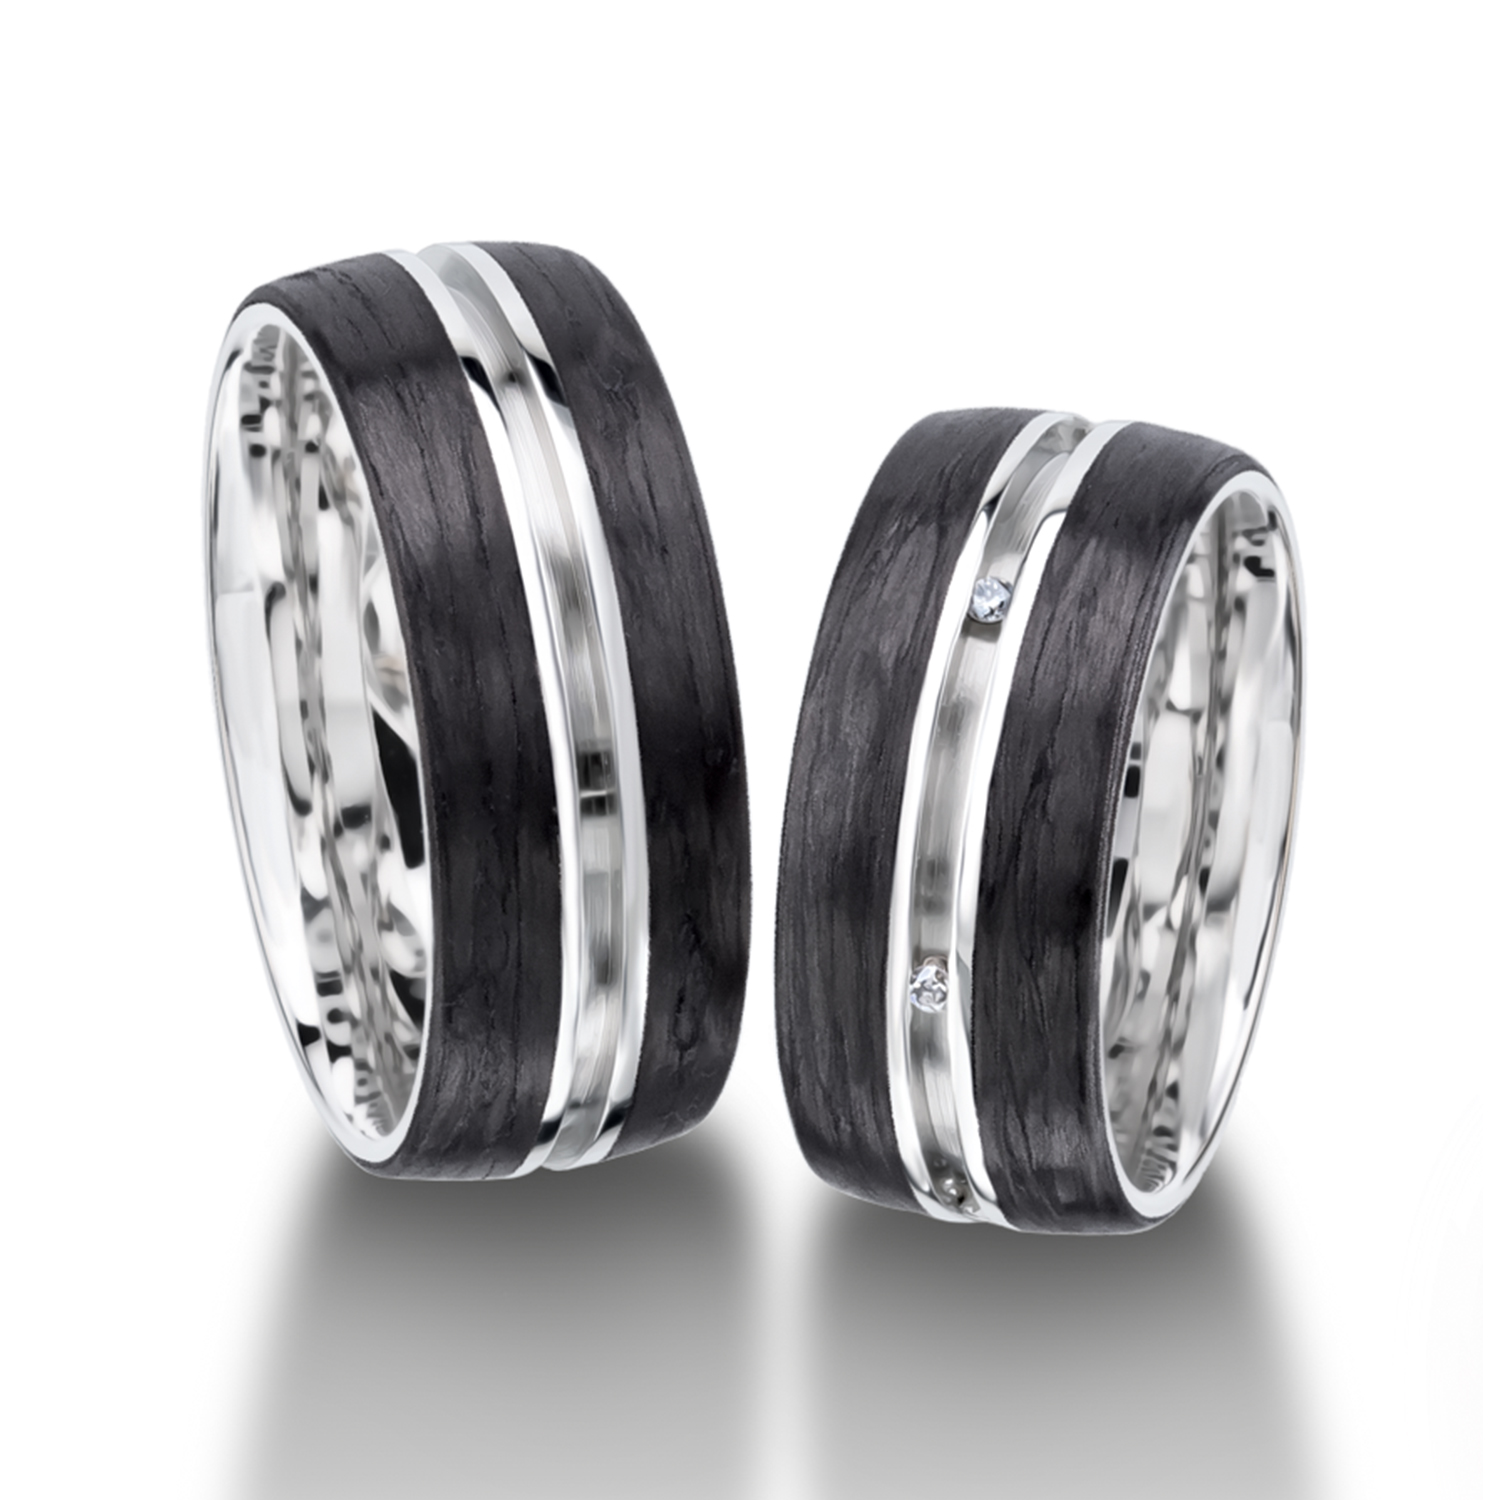 Carbon rings in gold, platinum and palladium with diamonds Furrer Jacot